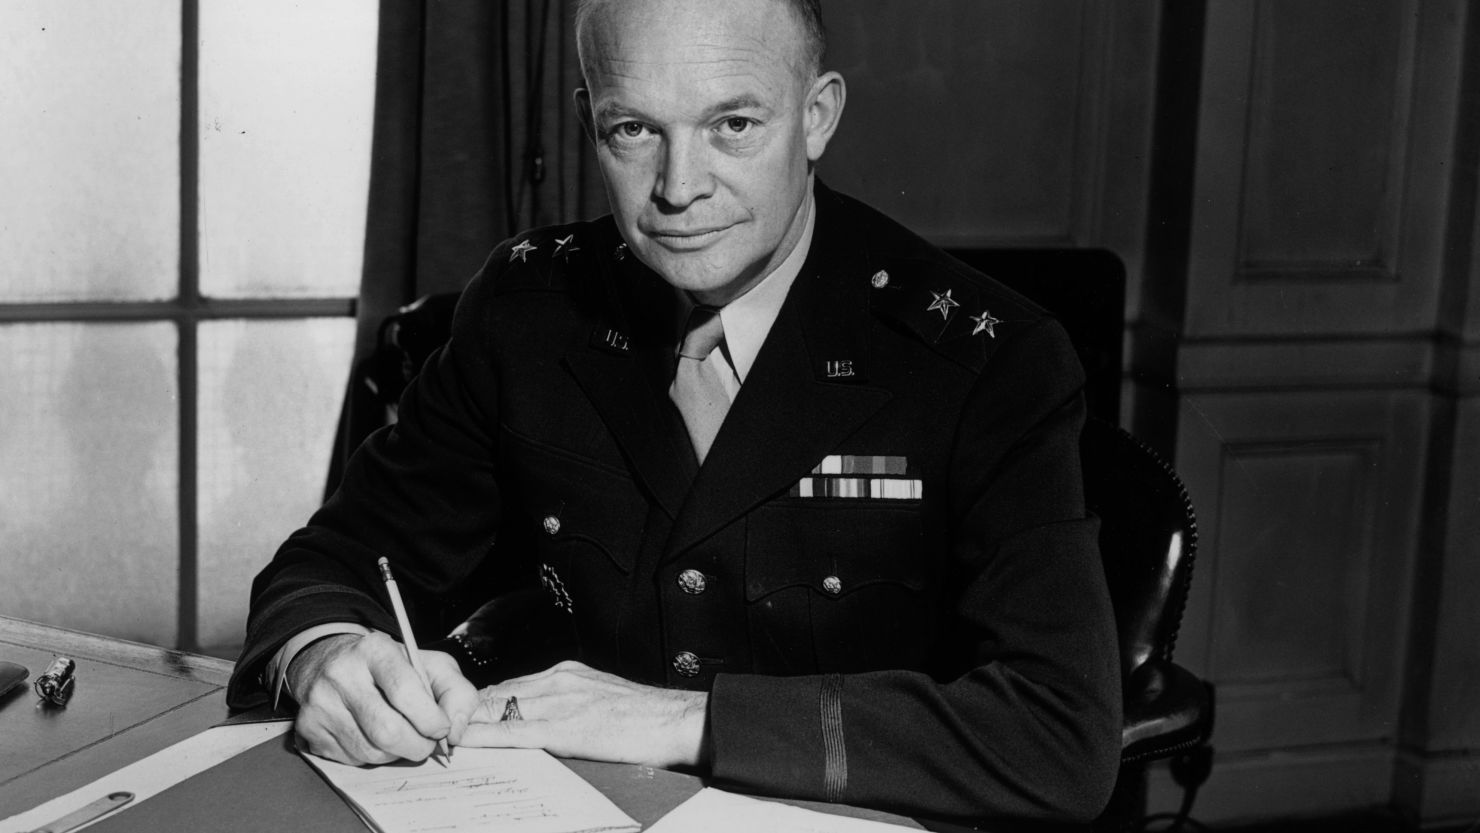 Gen. Dwight Eisenhower in 1942, as commander of the American forces in the European Theater.